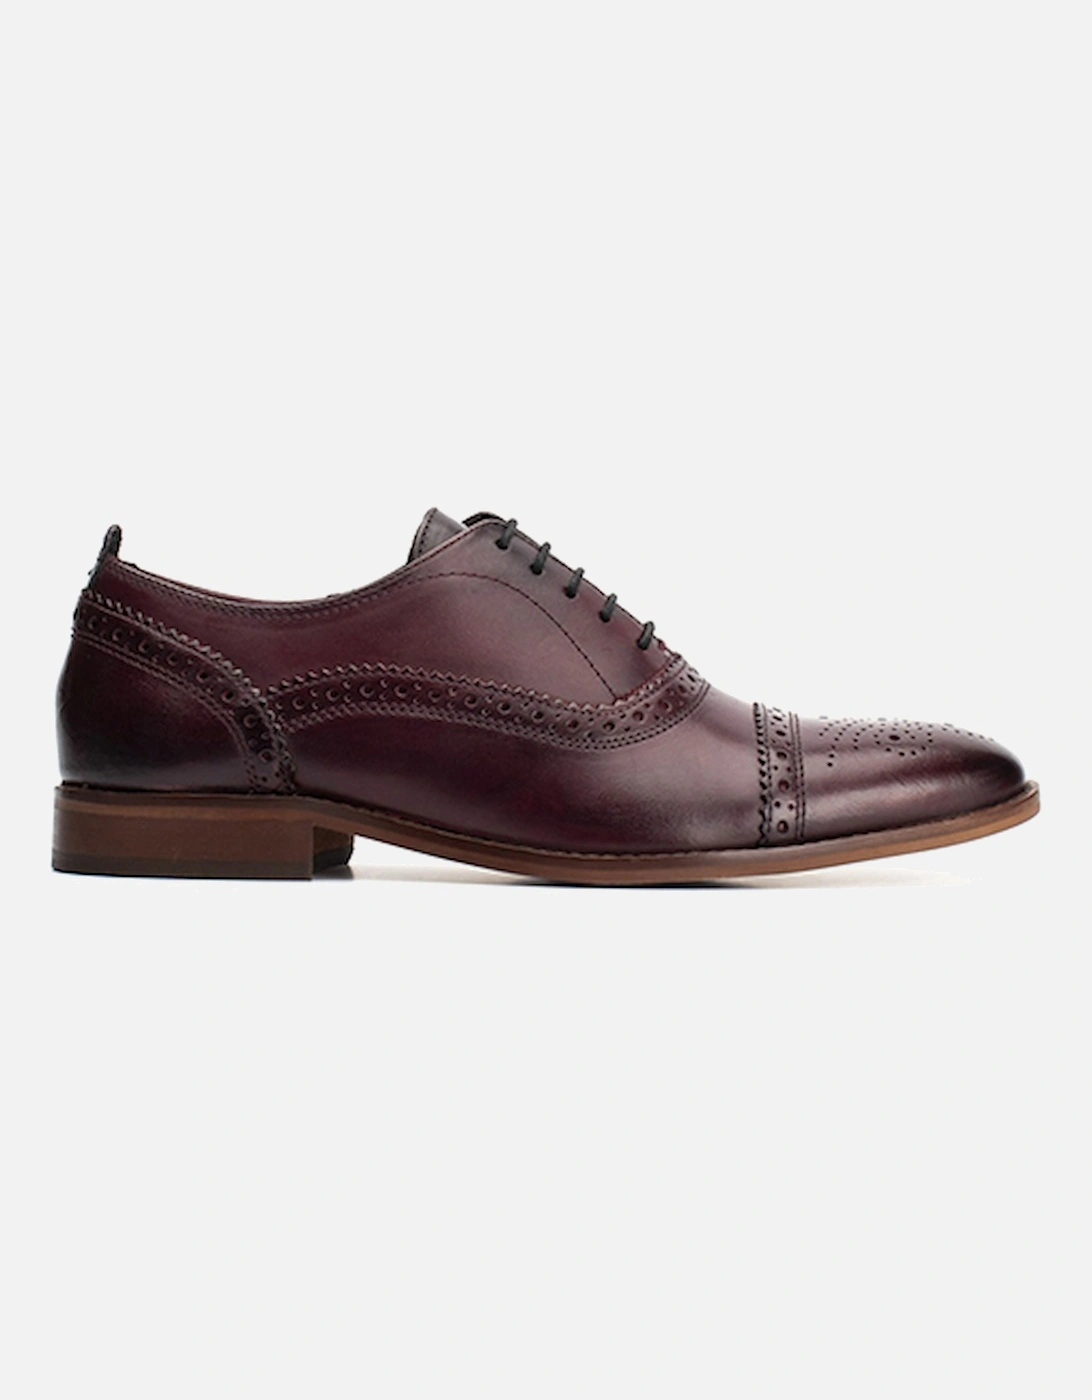 London Men's Cast Washed Lace Up Brogue Shoe Dark Red DFS